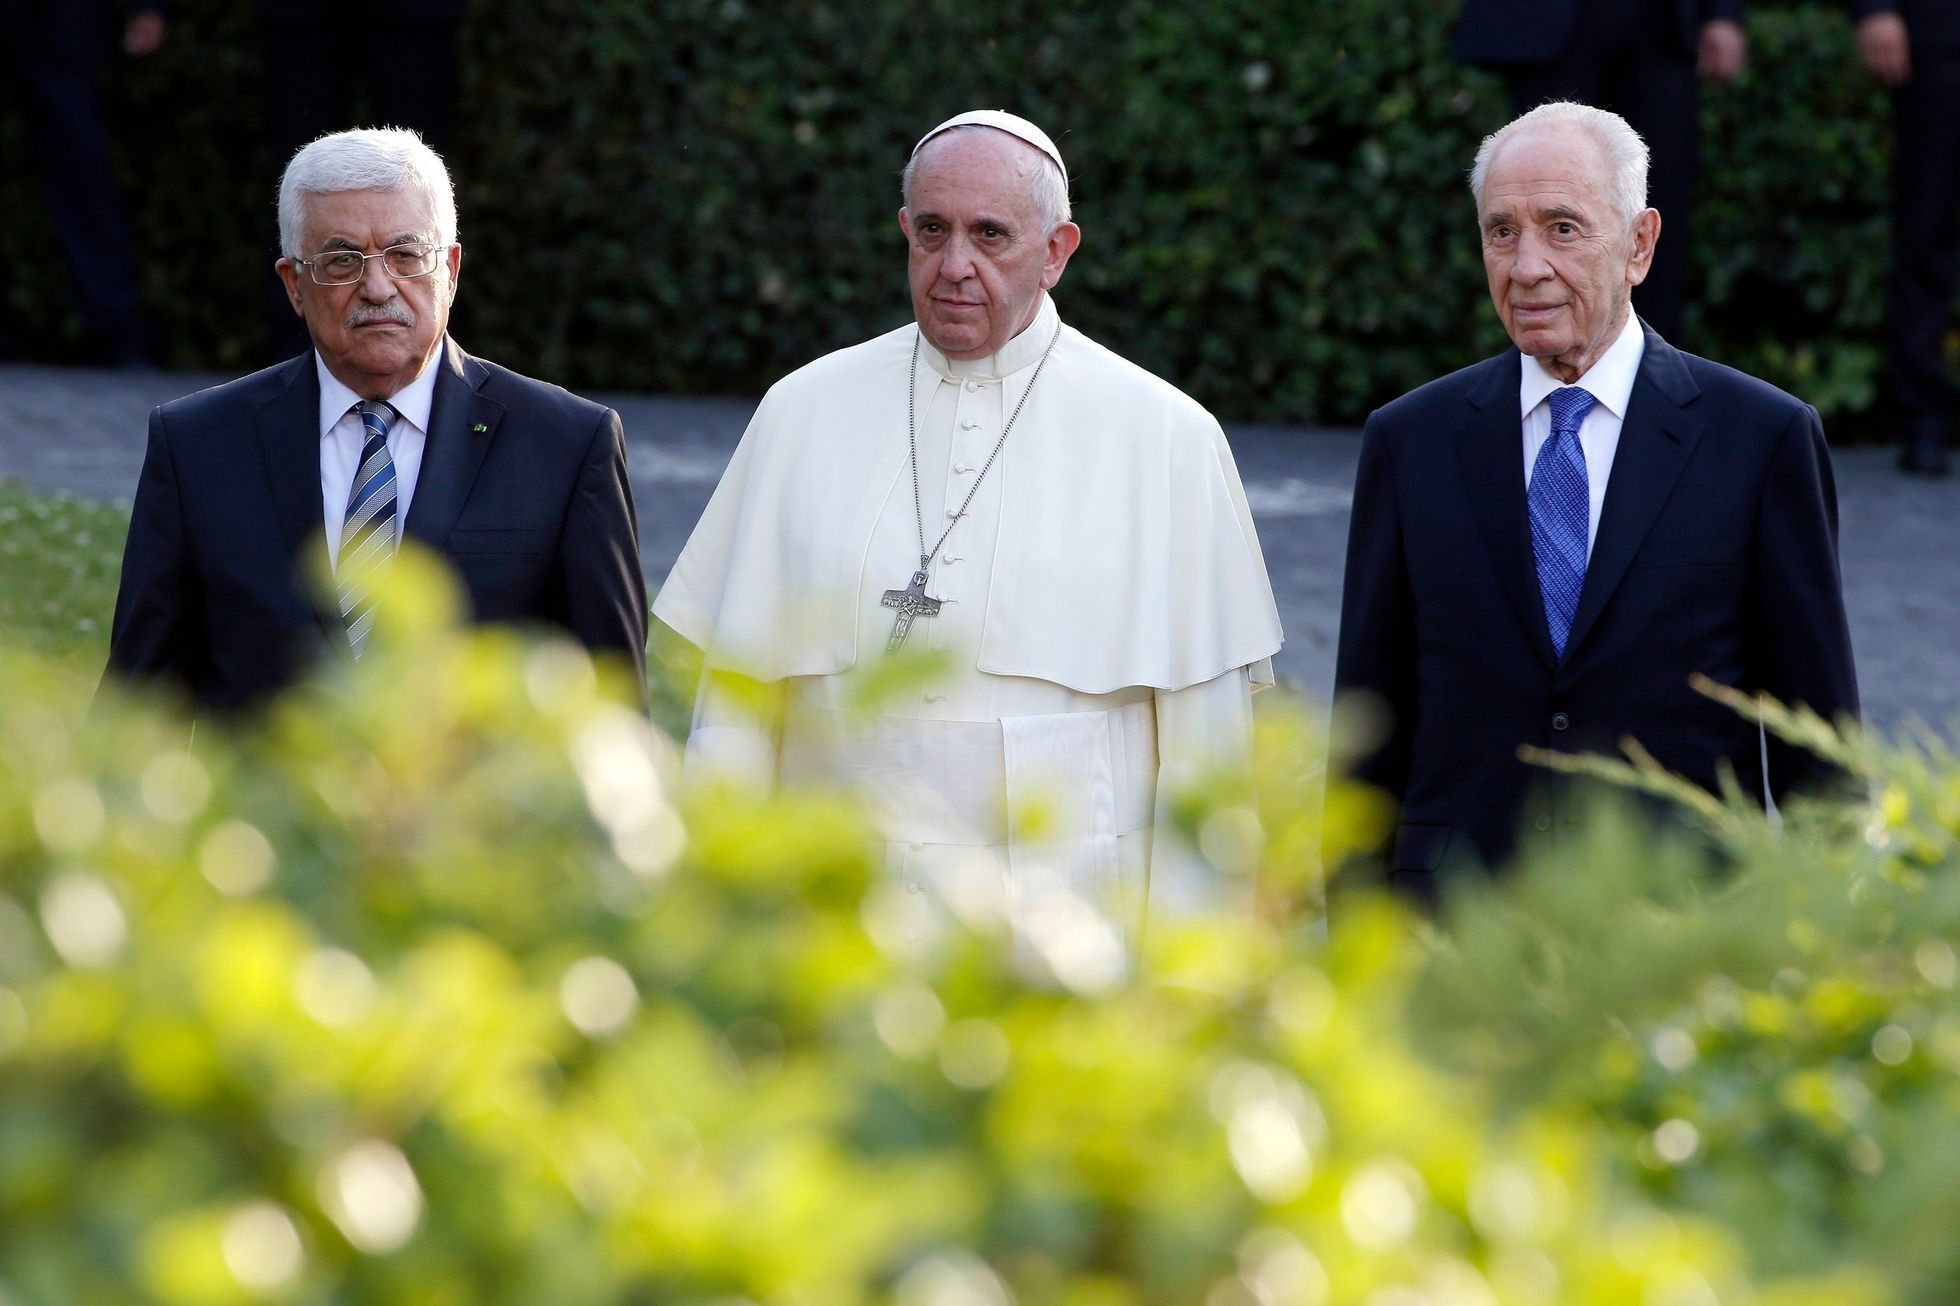 Palestinian President Abbas, Pope Francis and Israeli President Peres arrive in the Vatican Gardens to pray together at the Vatican